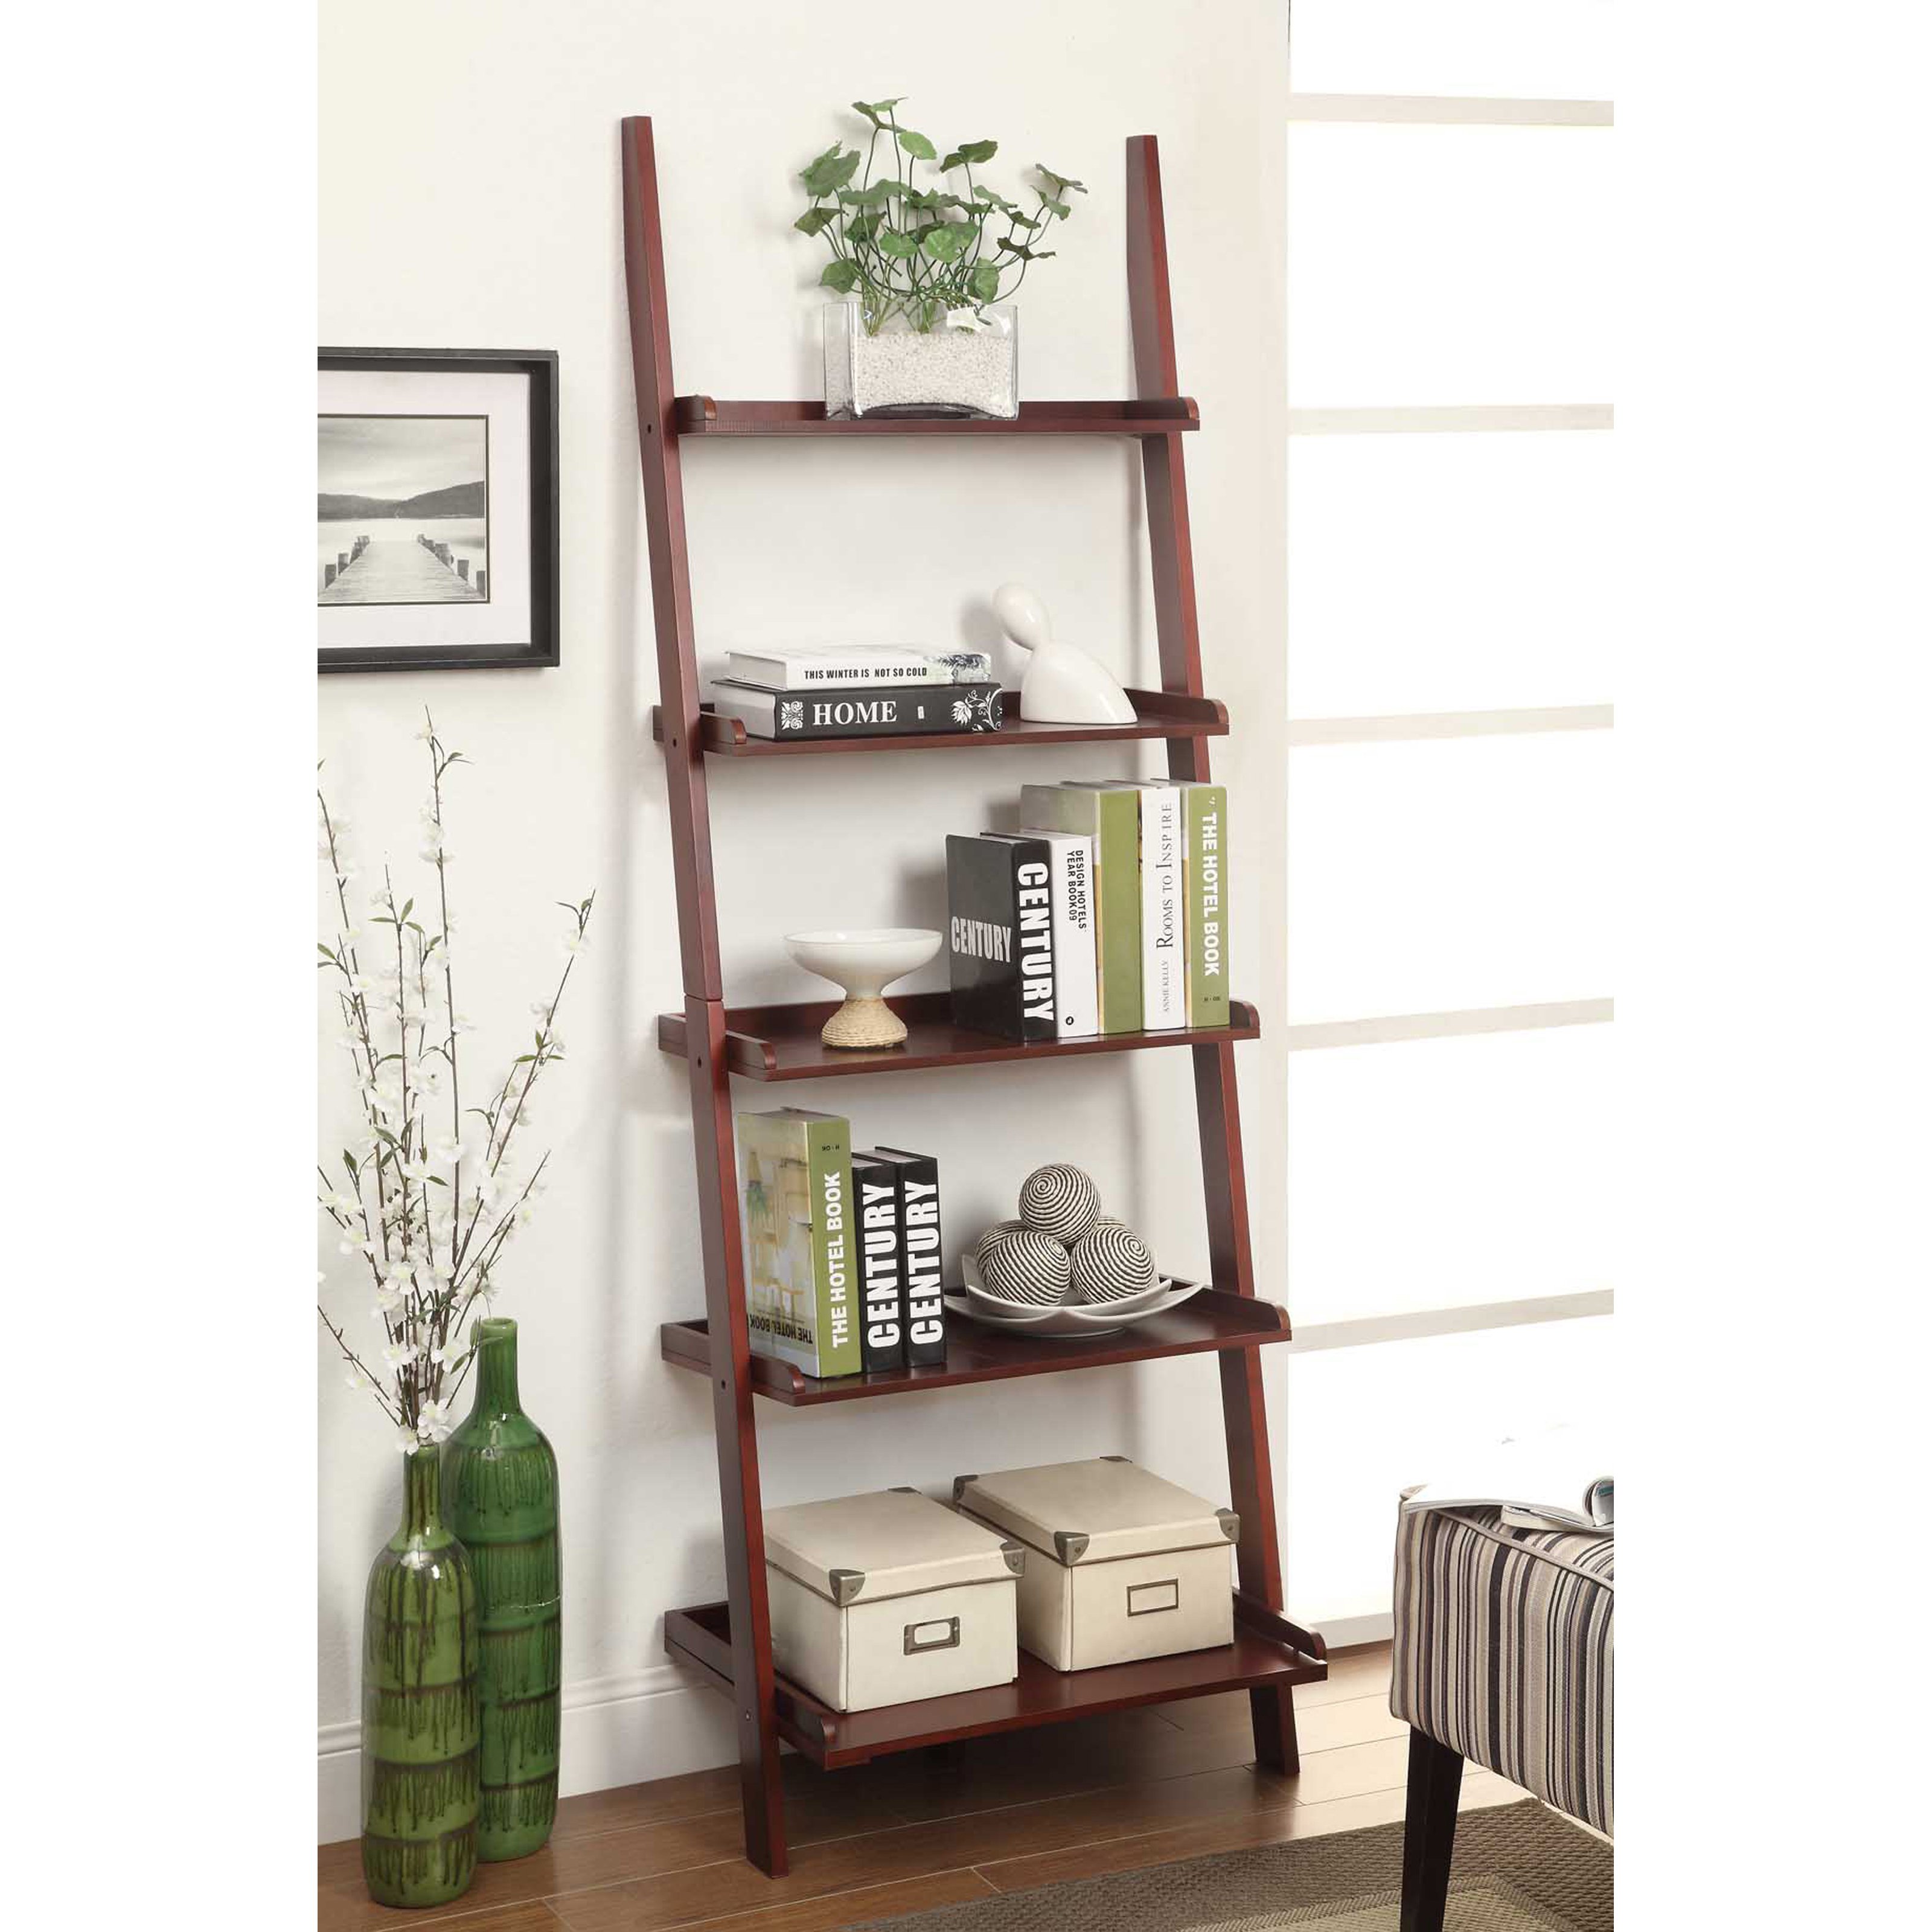 furniture fancy leaning bookcase for your book organizer idea ladder bookcases skinny shelf bookshelf narrow cases rustic lean floating shelves canadian tire crown molding wall